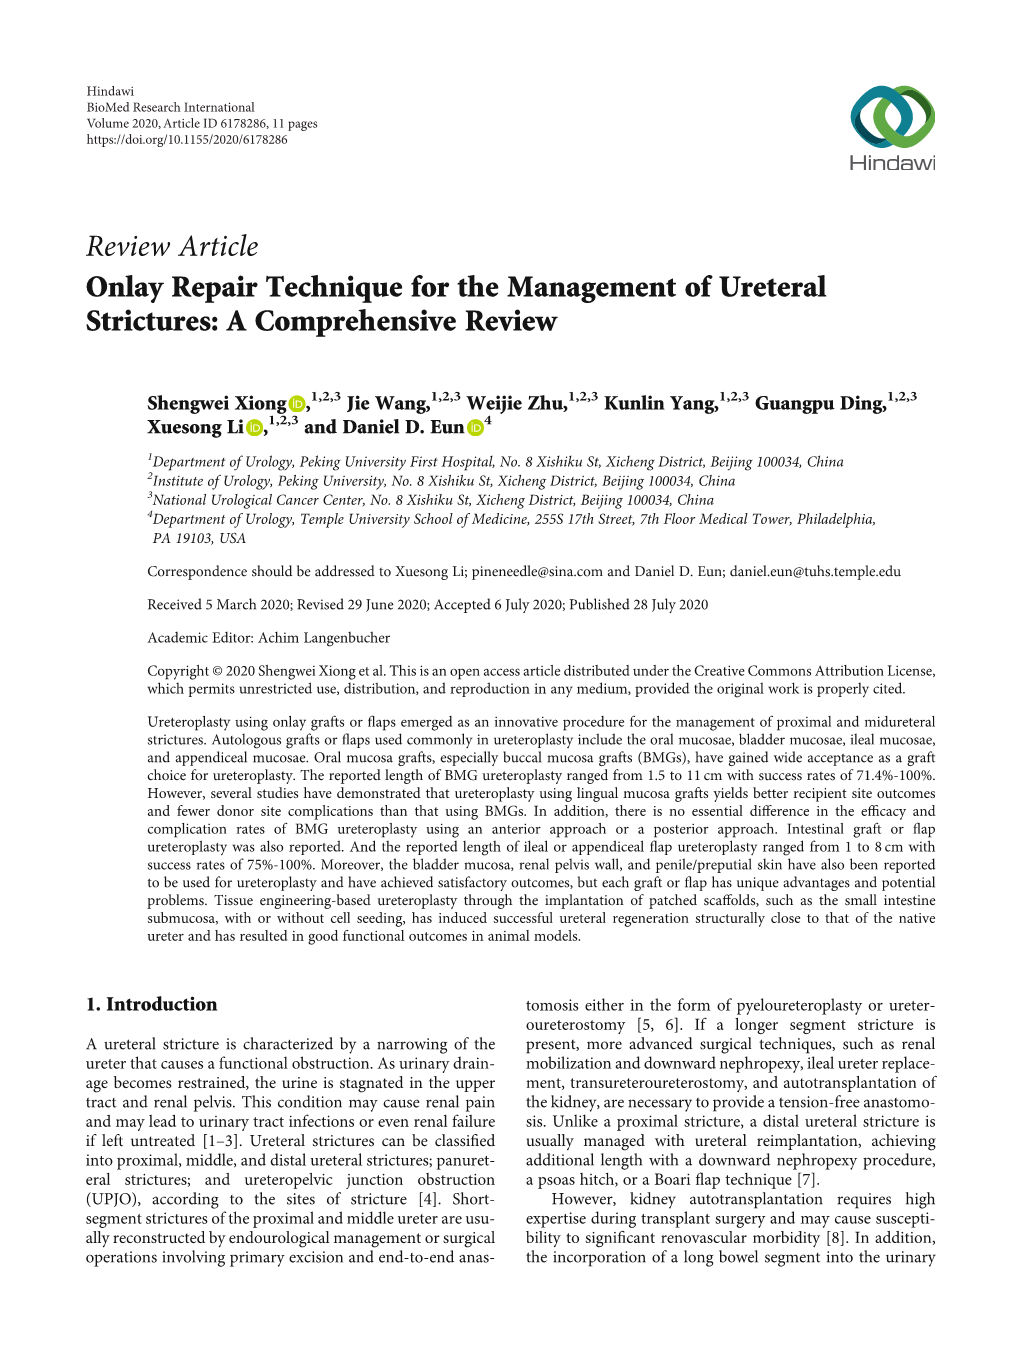 Onlay Repair Technique for the Management of Ureteral Strictures: a Comprehensive Review